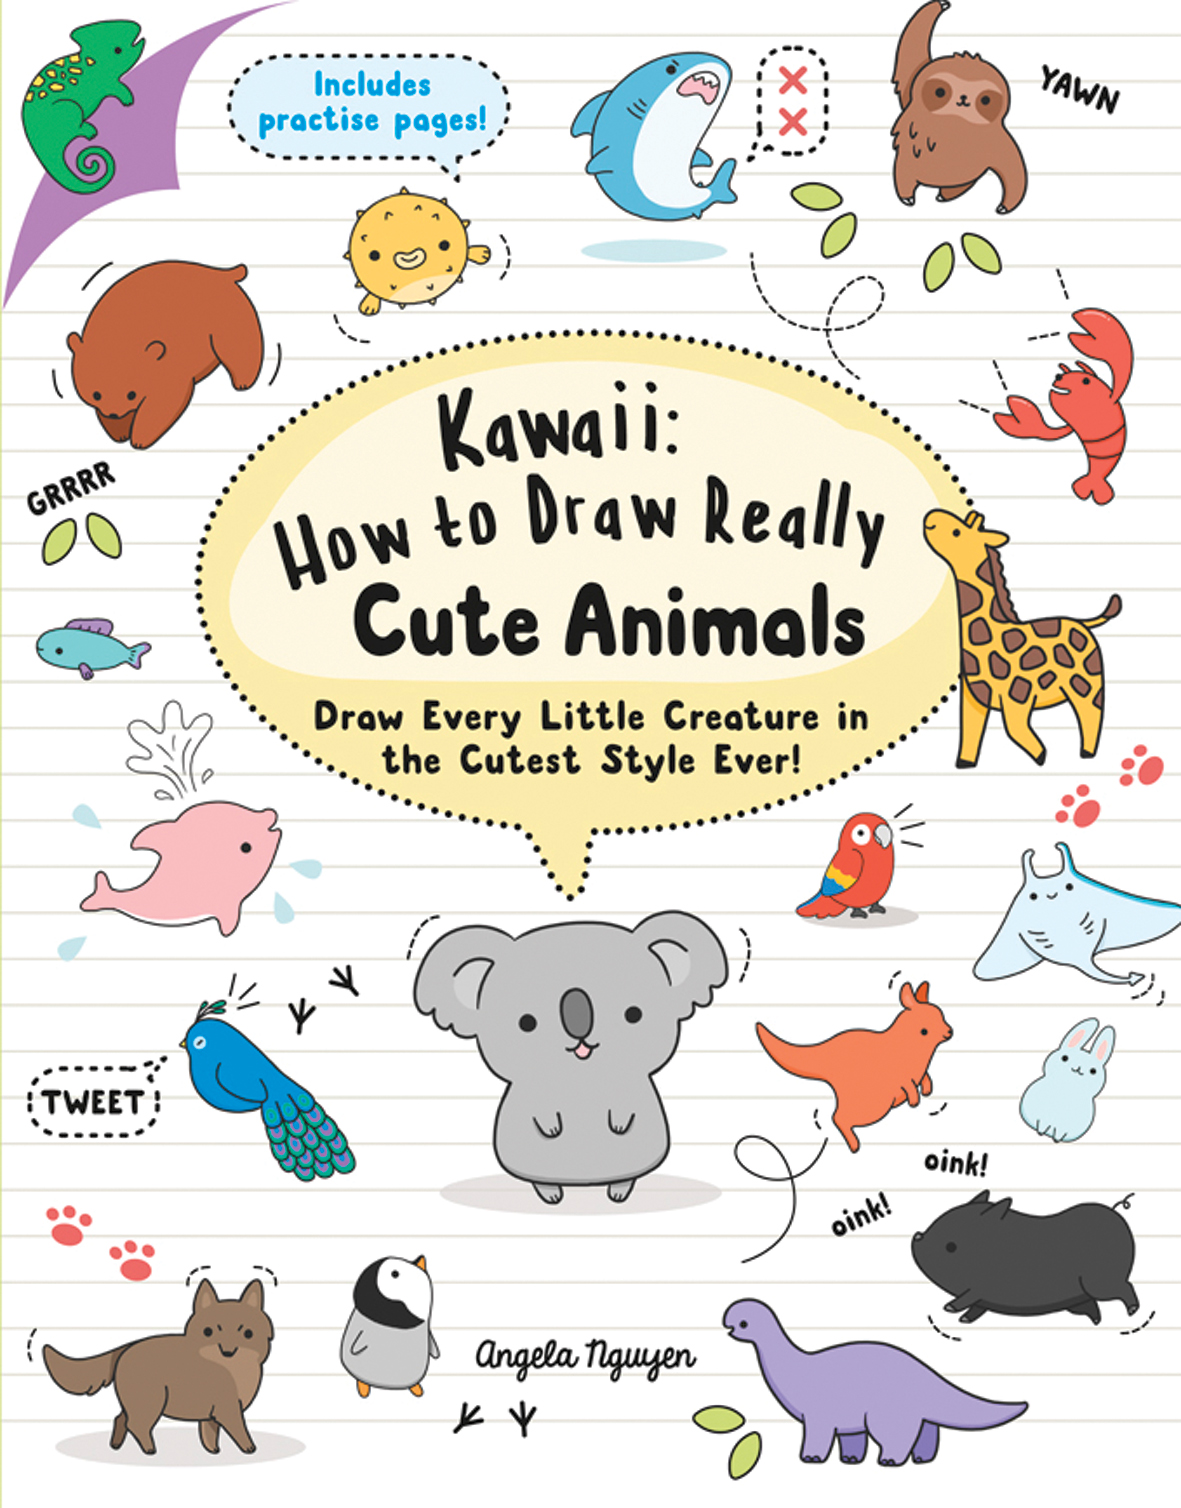 Search Press | Kawaii: How to Draw Really Cute Animals by Angela Nguyen